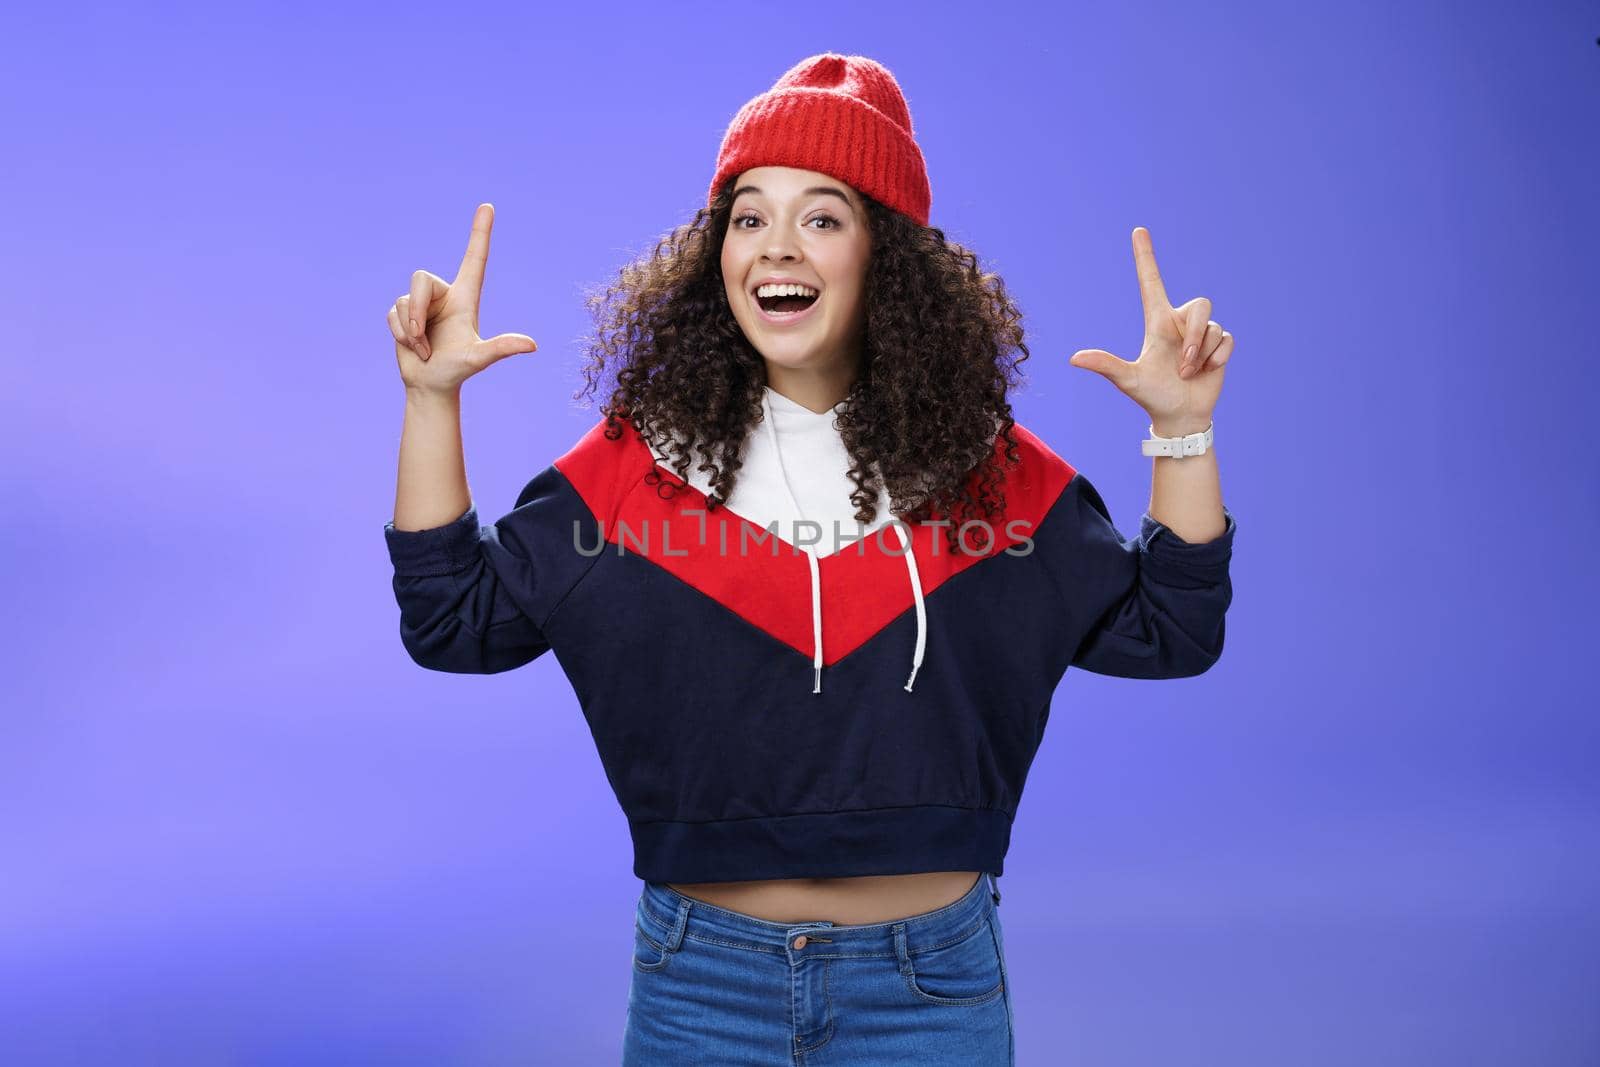 Waist-up shot of cheerful energized young woman calling friend inviting hang out as weather awesome pointing up with raised hands smiling broadly posing in red winter hat over blue background by Benzoix